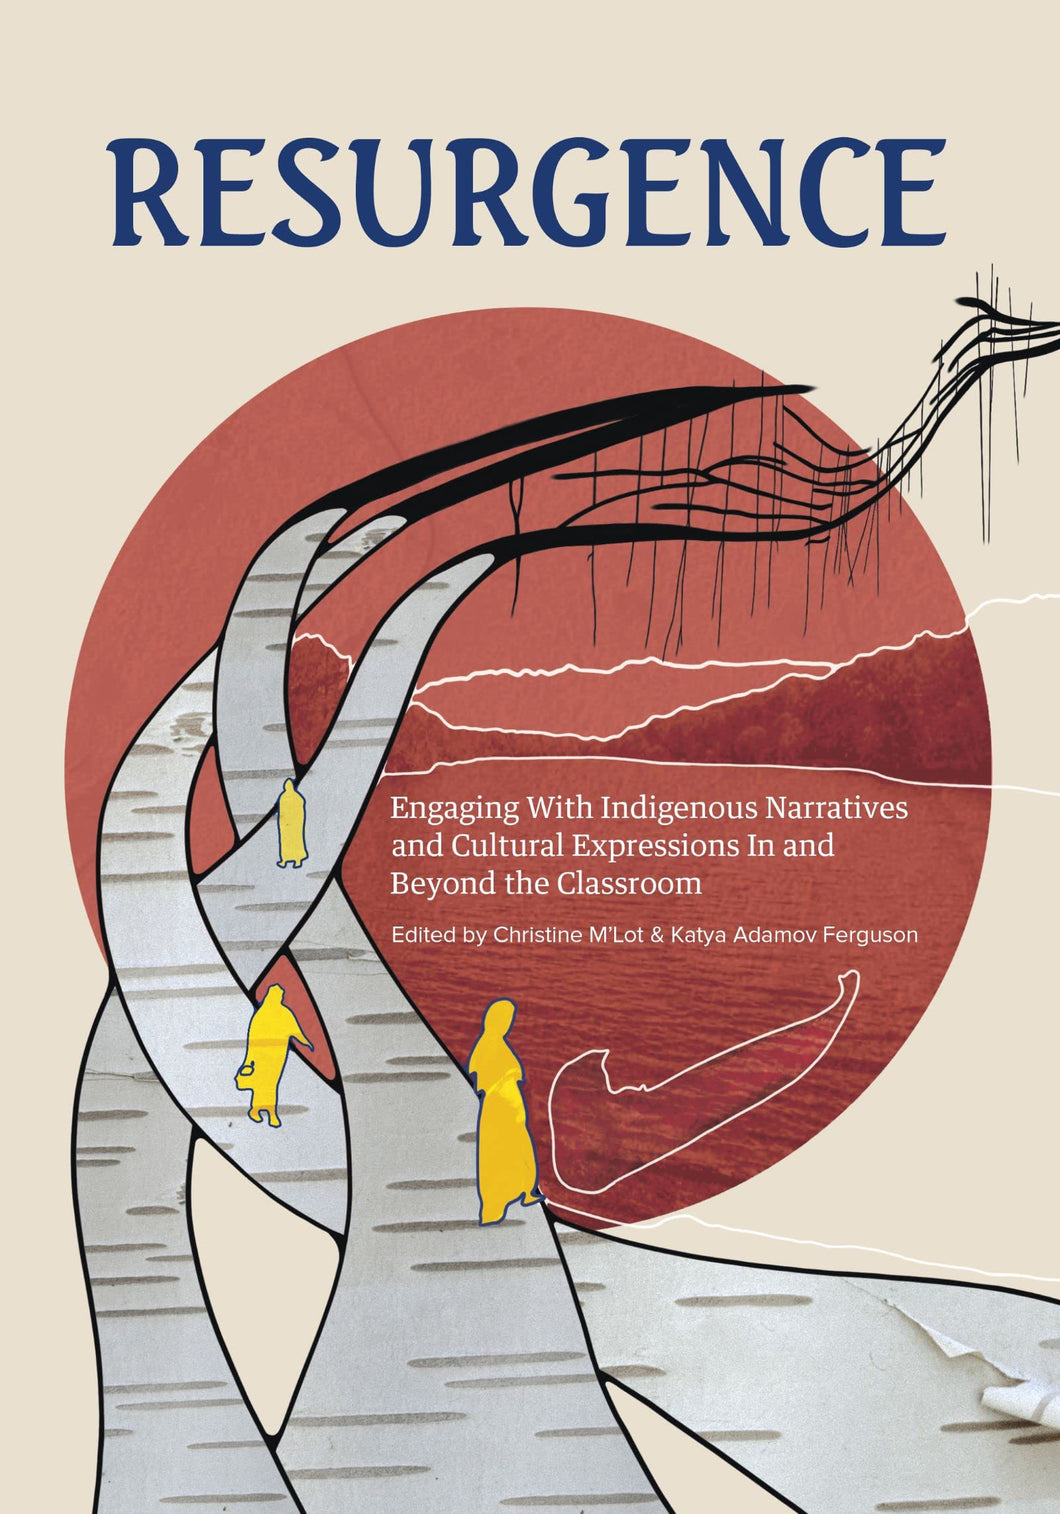 Resurgence: Engaging With Indigenous Narratives and Cultural Expressions In and Beyond the Classroom [KC Adams, Sonya Ballantyne, et al]